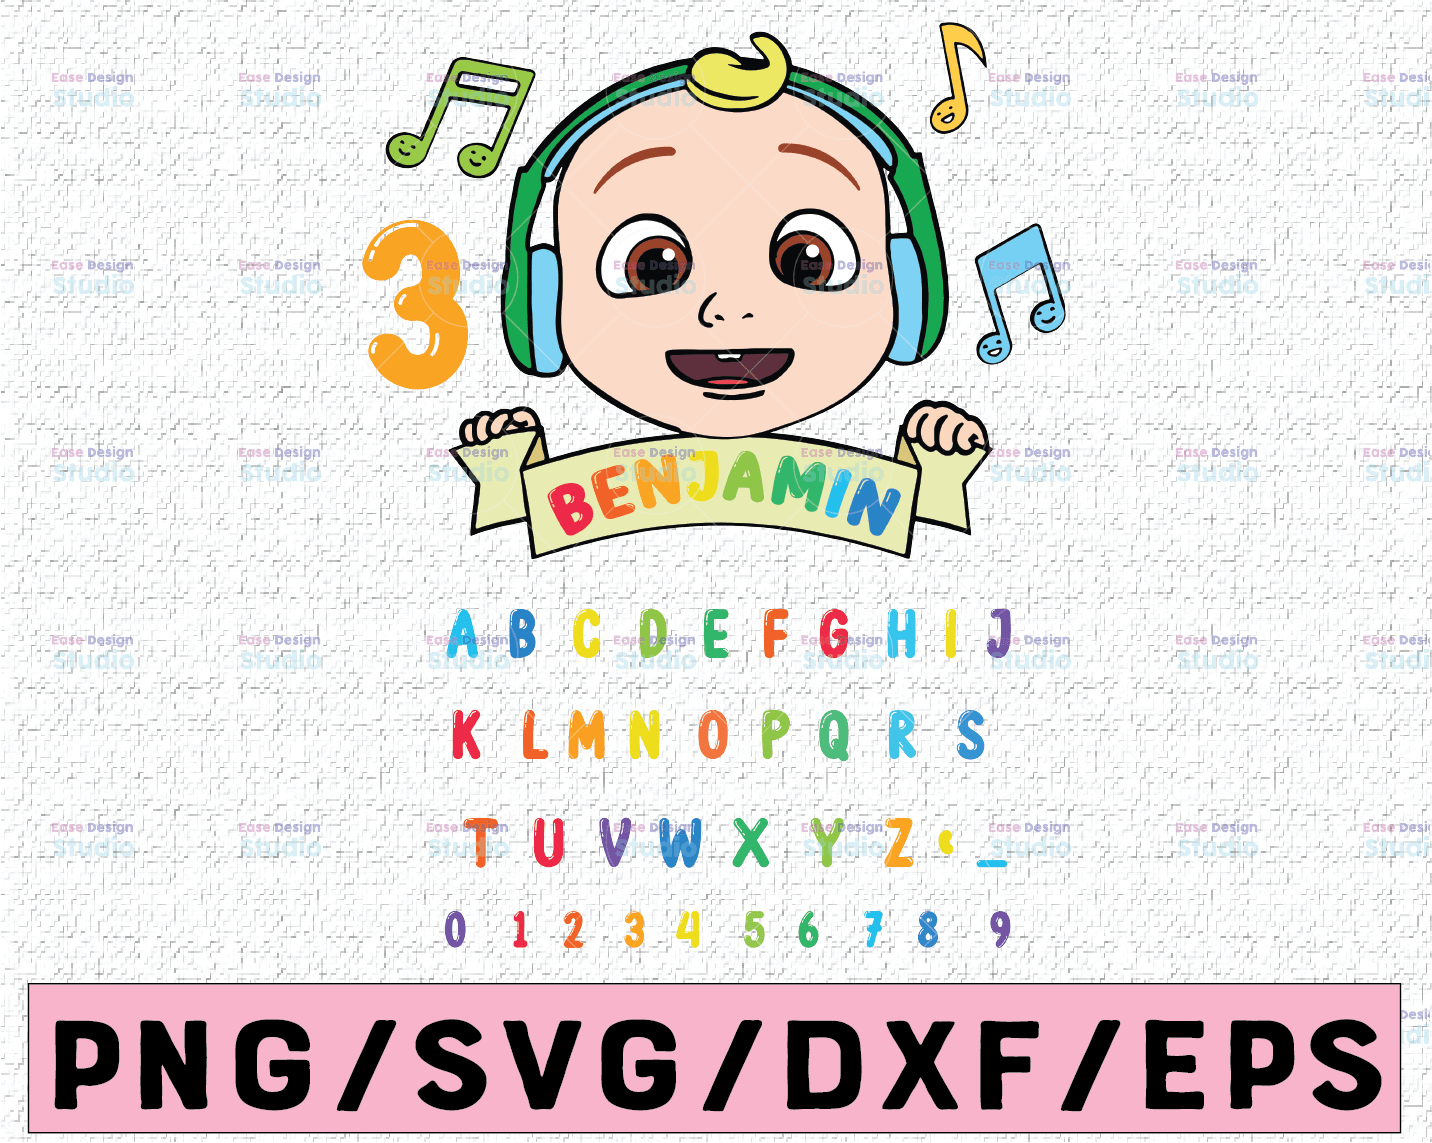 Download Cocomelon Logo And Full Alphabets Birthday Svg Png Cocomelon Birthday Svg Png Cocomelon Family Birthday Png Watermelon Svg Png Eps Jpg Dxf Vectorency